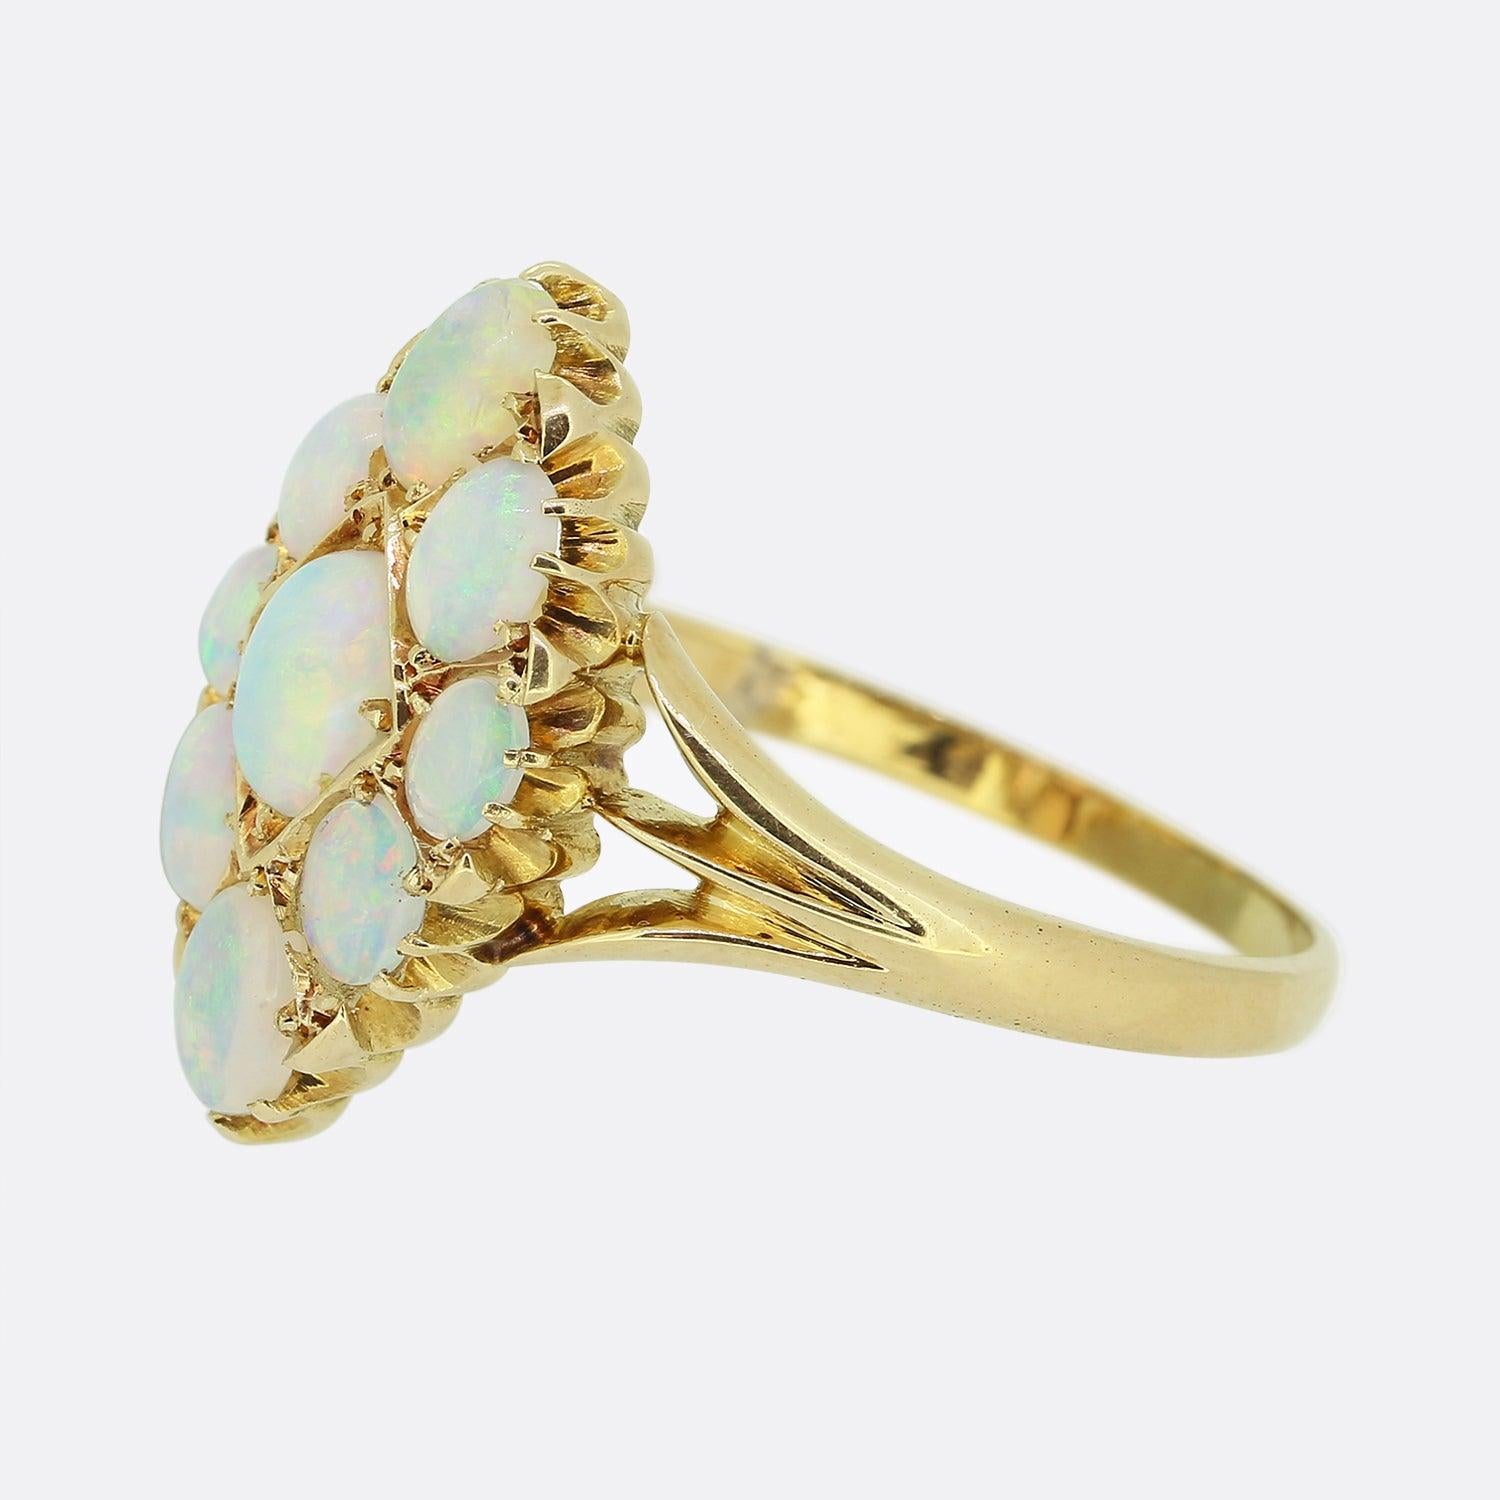 Here we have a stunning antique opal navette ring dating back to the Edwardian period. A cluster of nine oval shaped white opals possessing a magical iridescence, dominate the boat shaped face in individual clawed settings. The piece is then